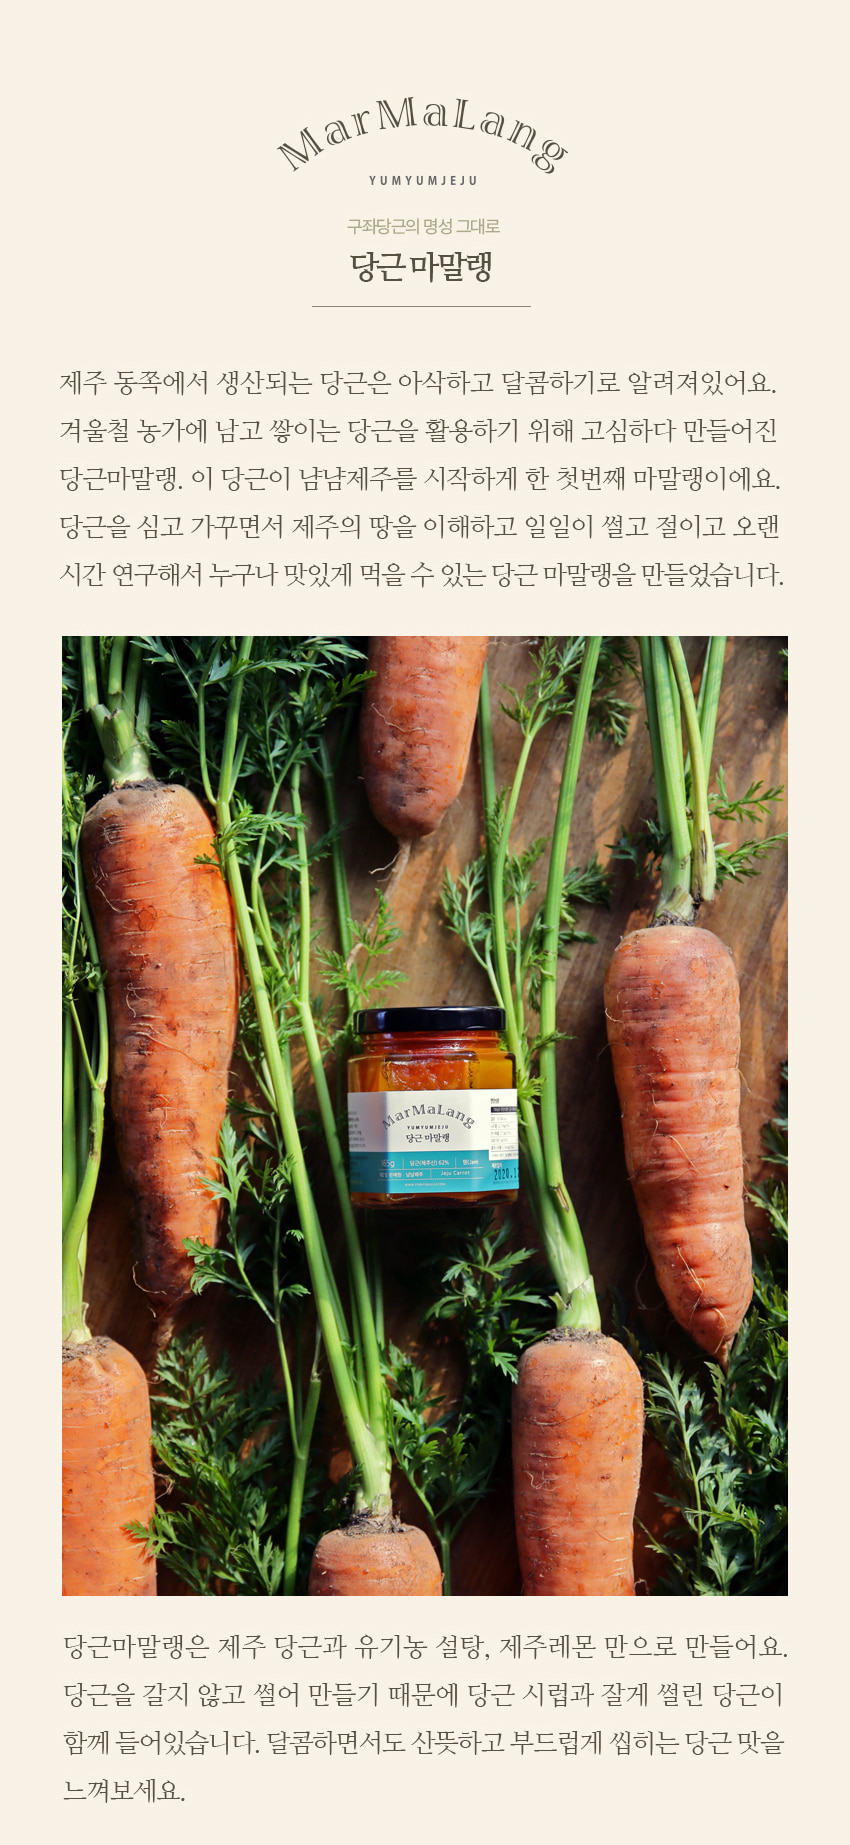 How dose YumYum Jeju Marmalang differ from others? We use primary products supplied from local farms, and they are mostly organic.  All recipes are authentic. Jams are low (organic) sugar and contain no preservatives and additives.We do not squash fresh fruits, because chopped ones give a rich creamy texture like that of fruit butter.